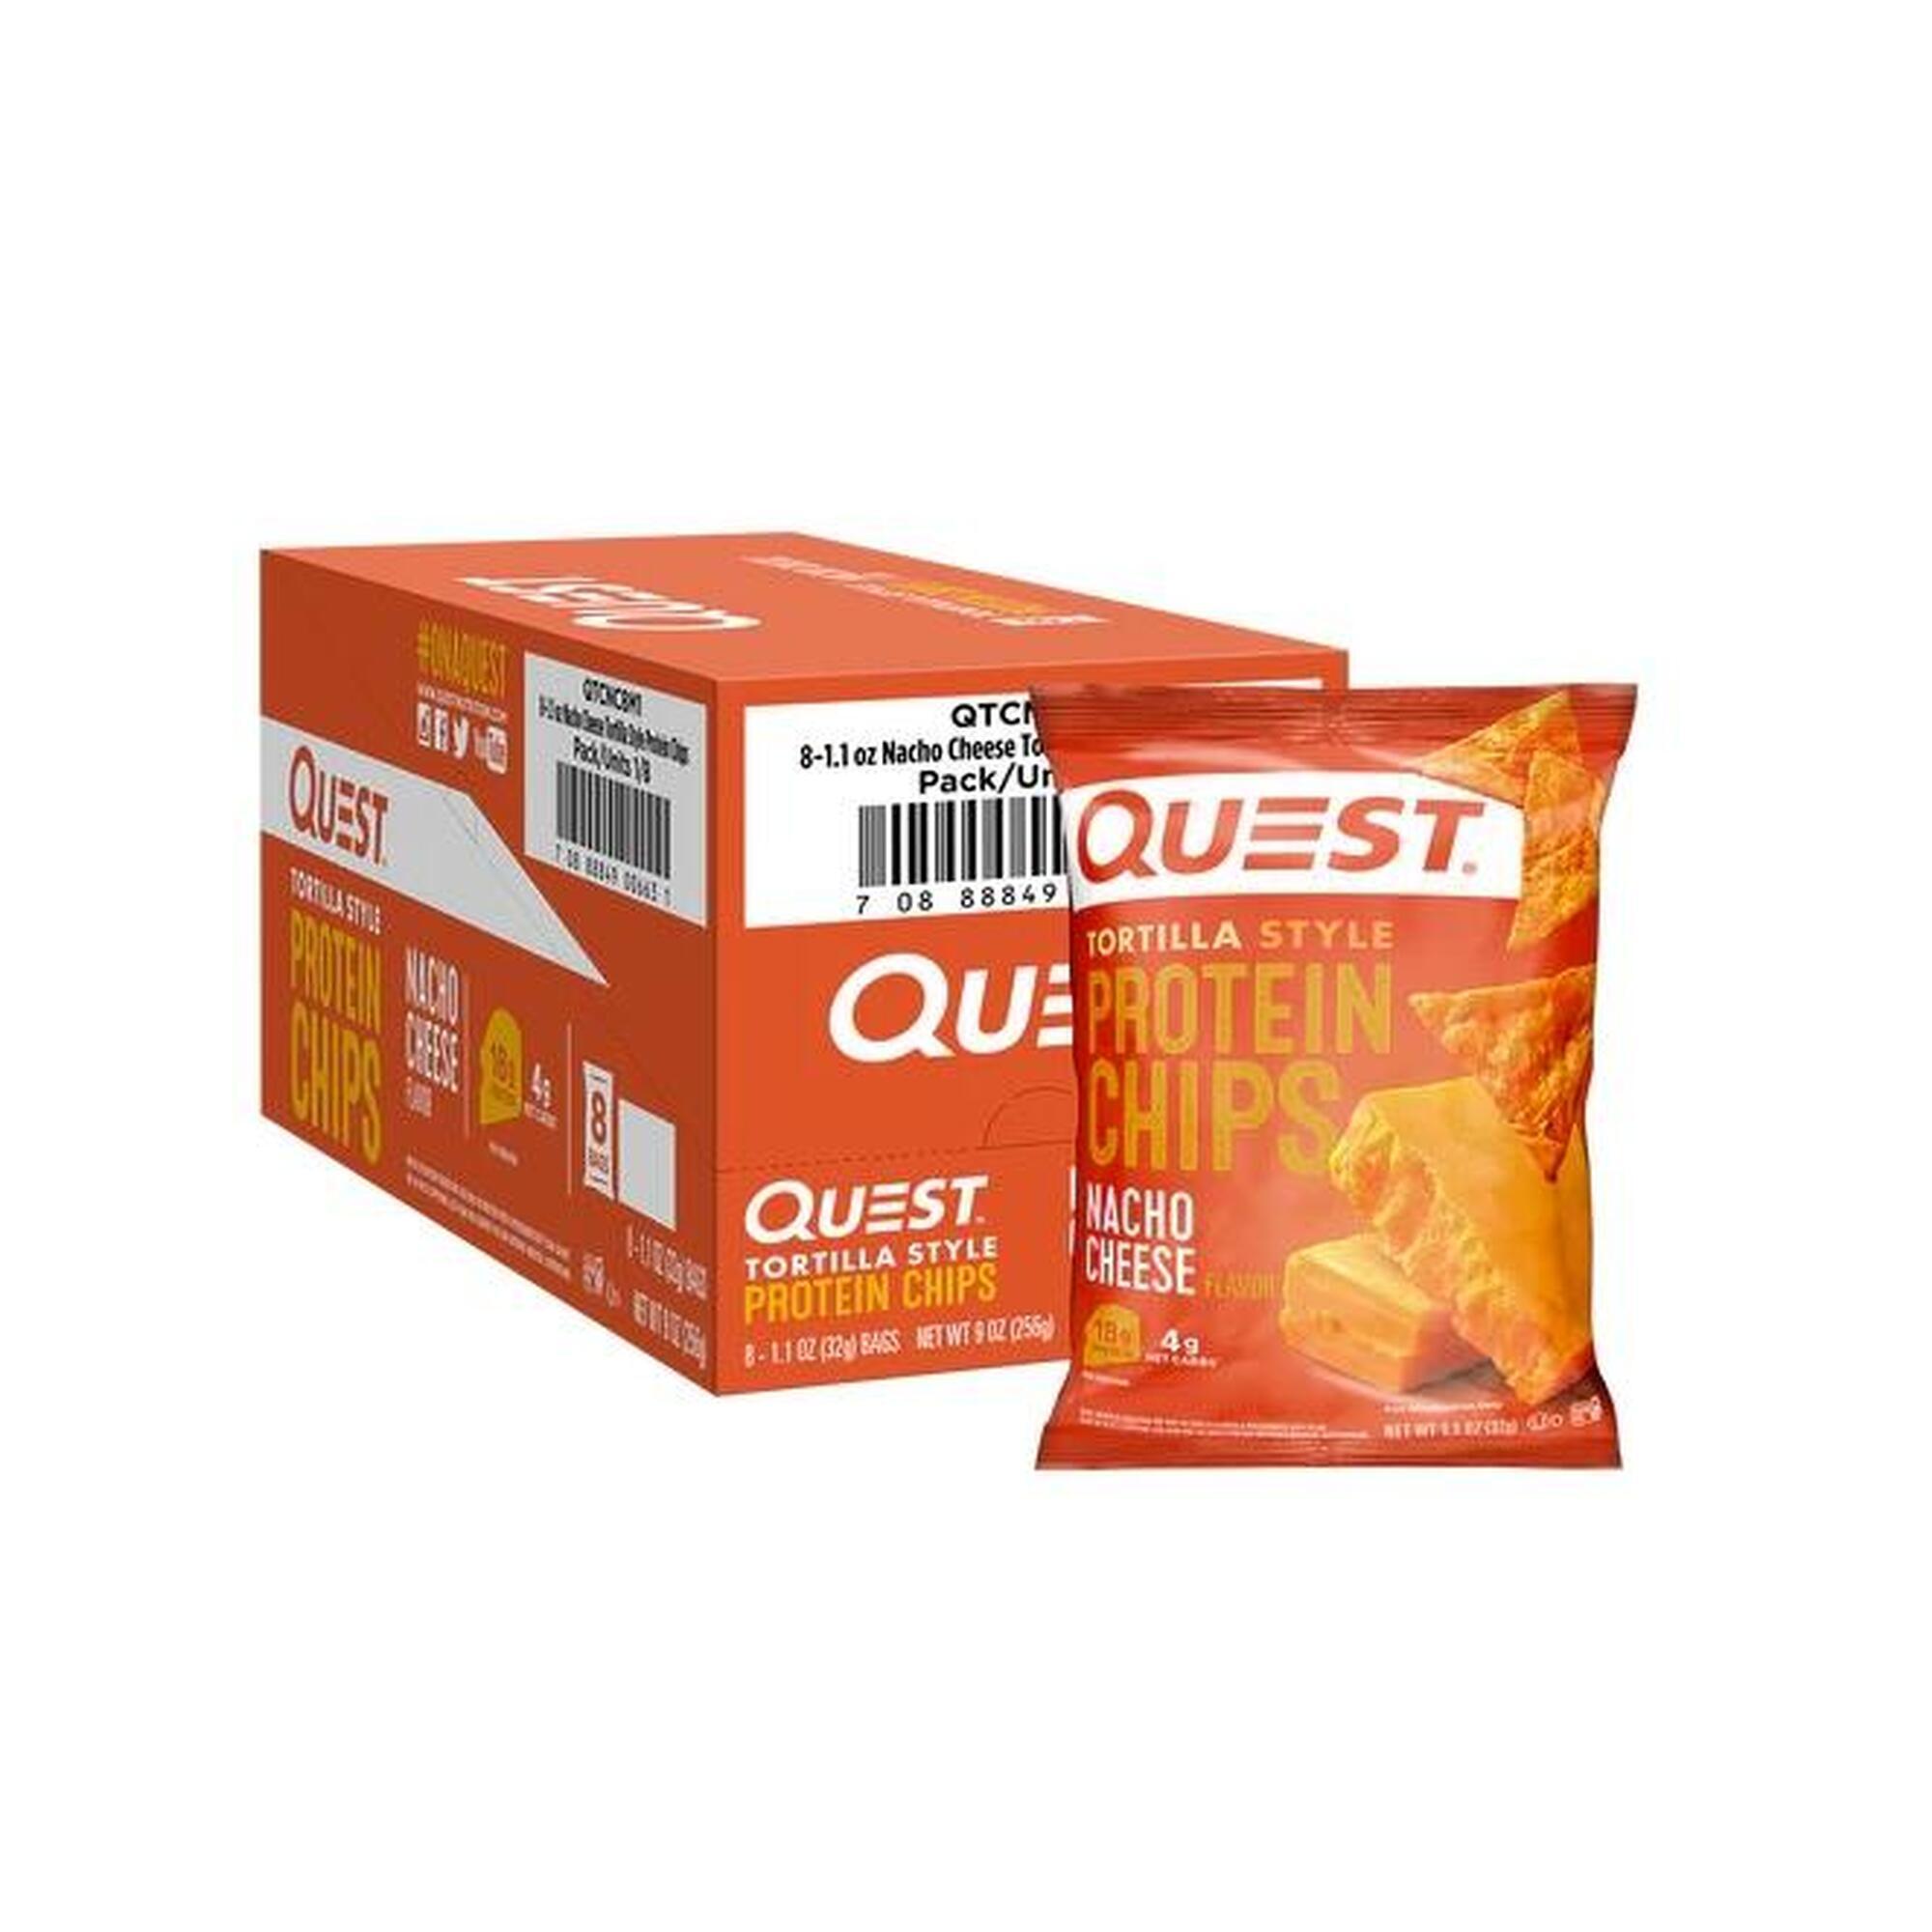 Quest Protein Chips - NACHO CHEESE - TORTILLA STYLE 8 PACKS